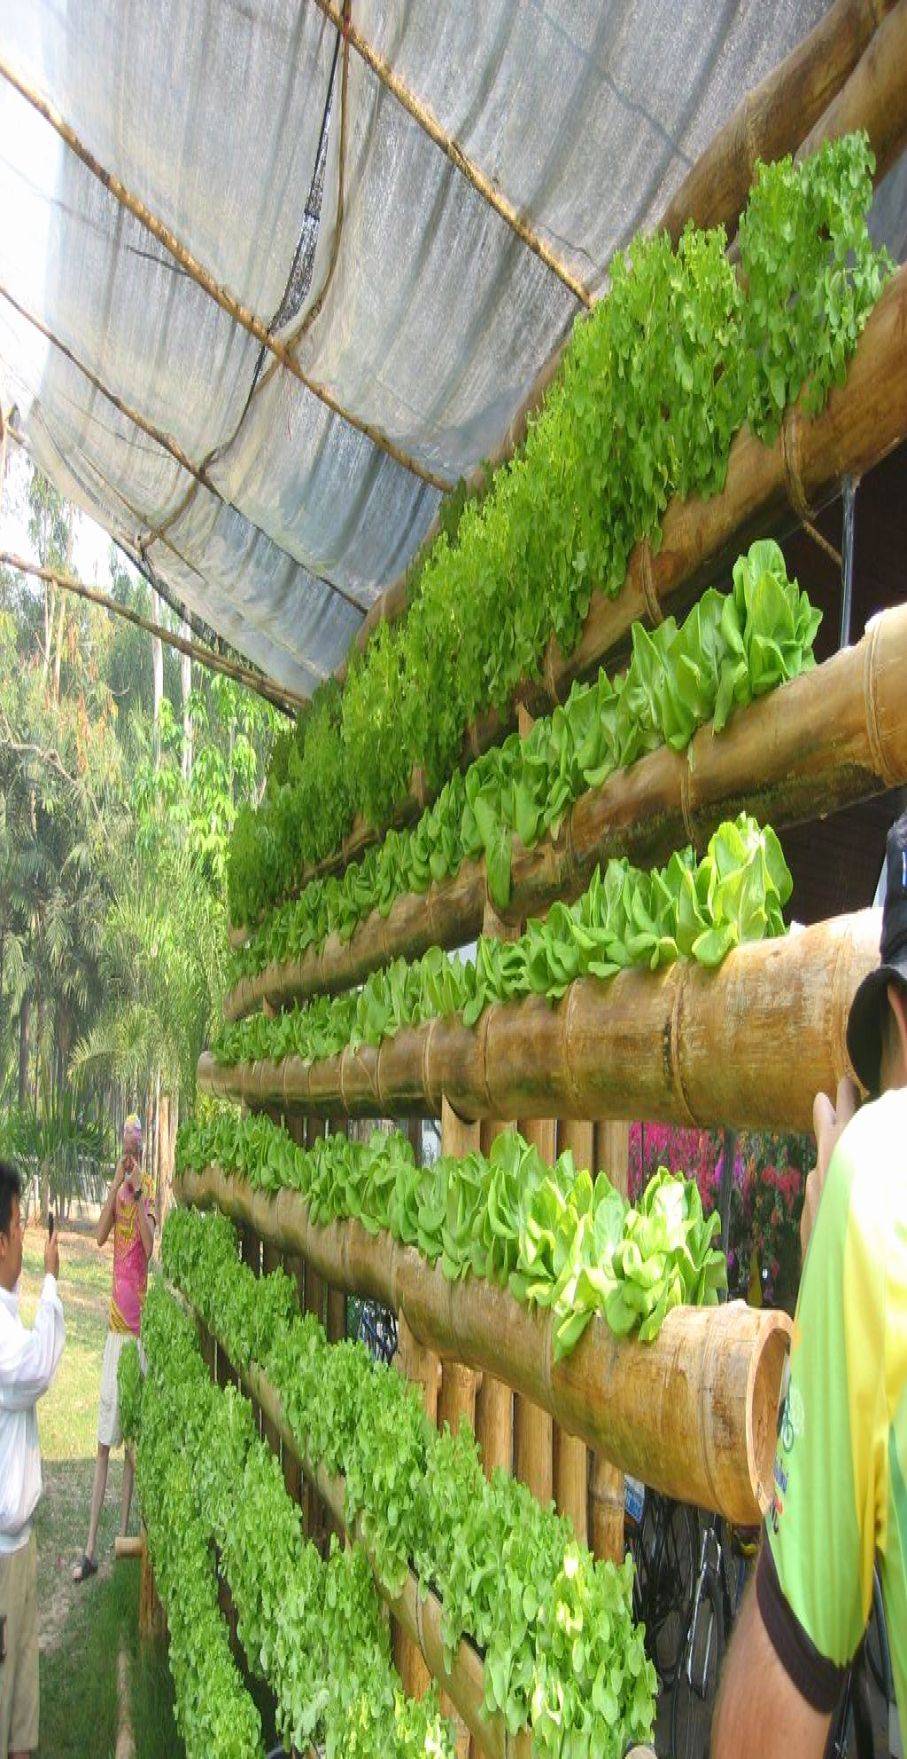 Awesome Hydroponic Garden Ideas